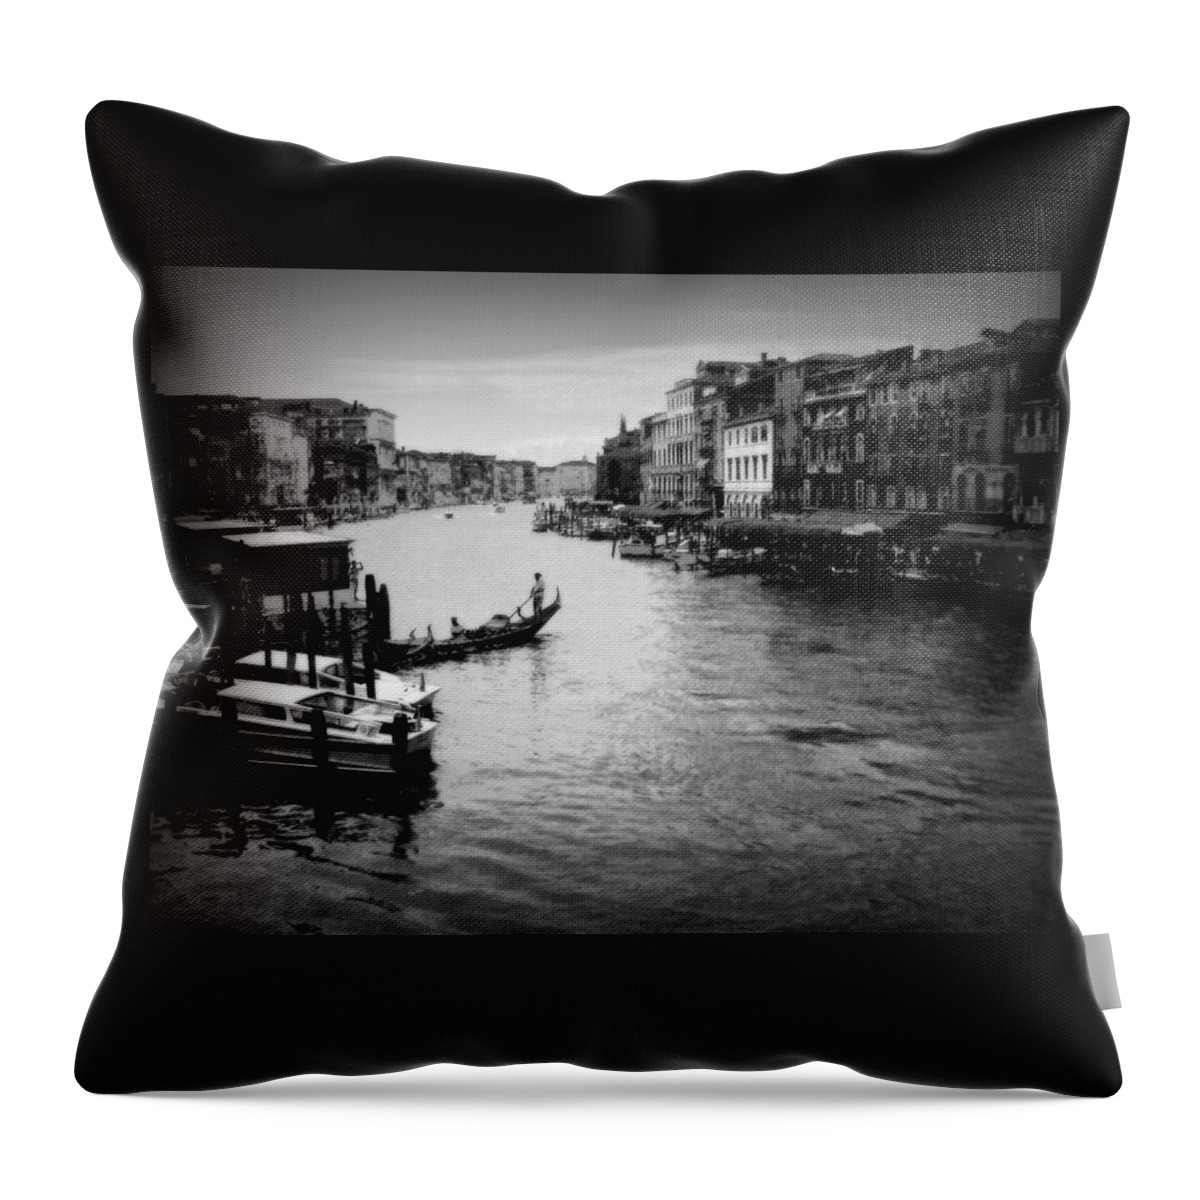 Italy Throw Pillow featuring the photograph The Grand Canal by Jodie Marie Anne Richardson Traugott     aka jm-ART